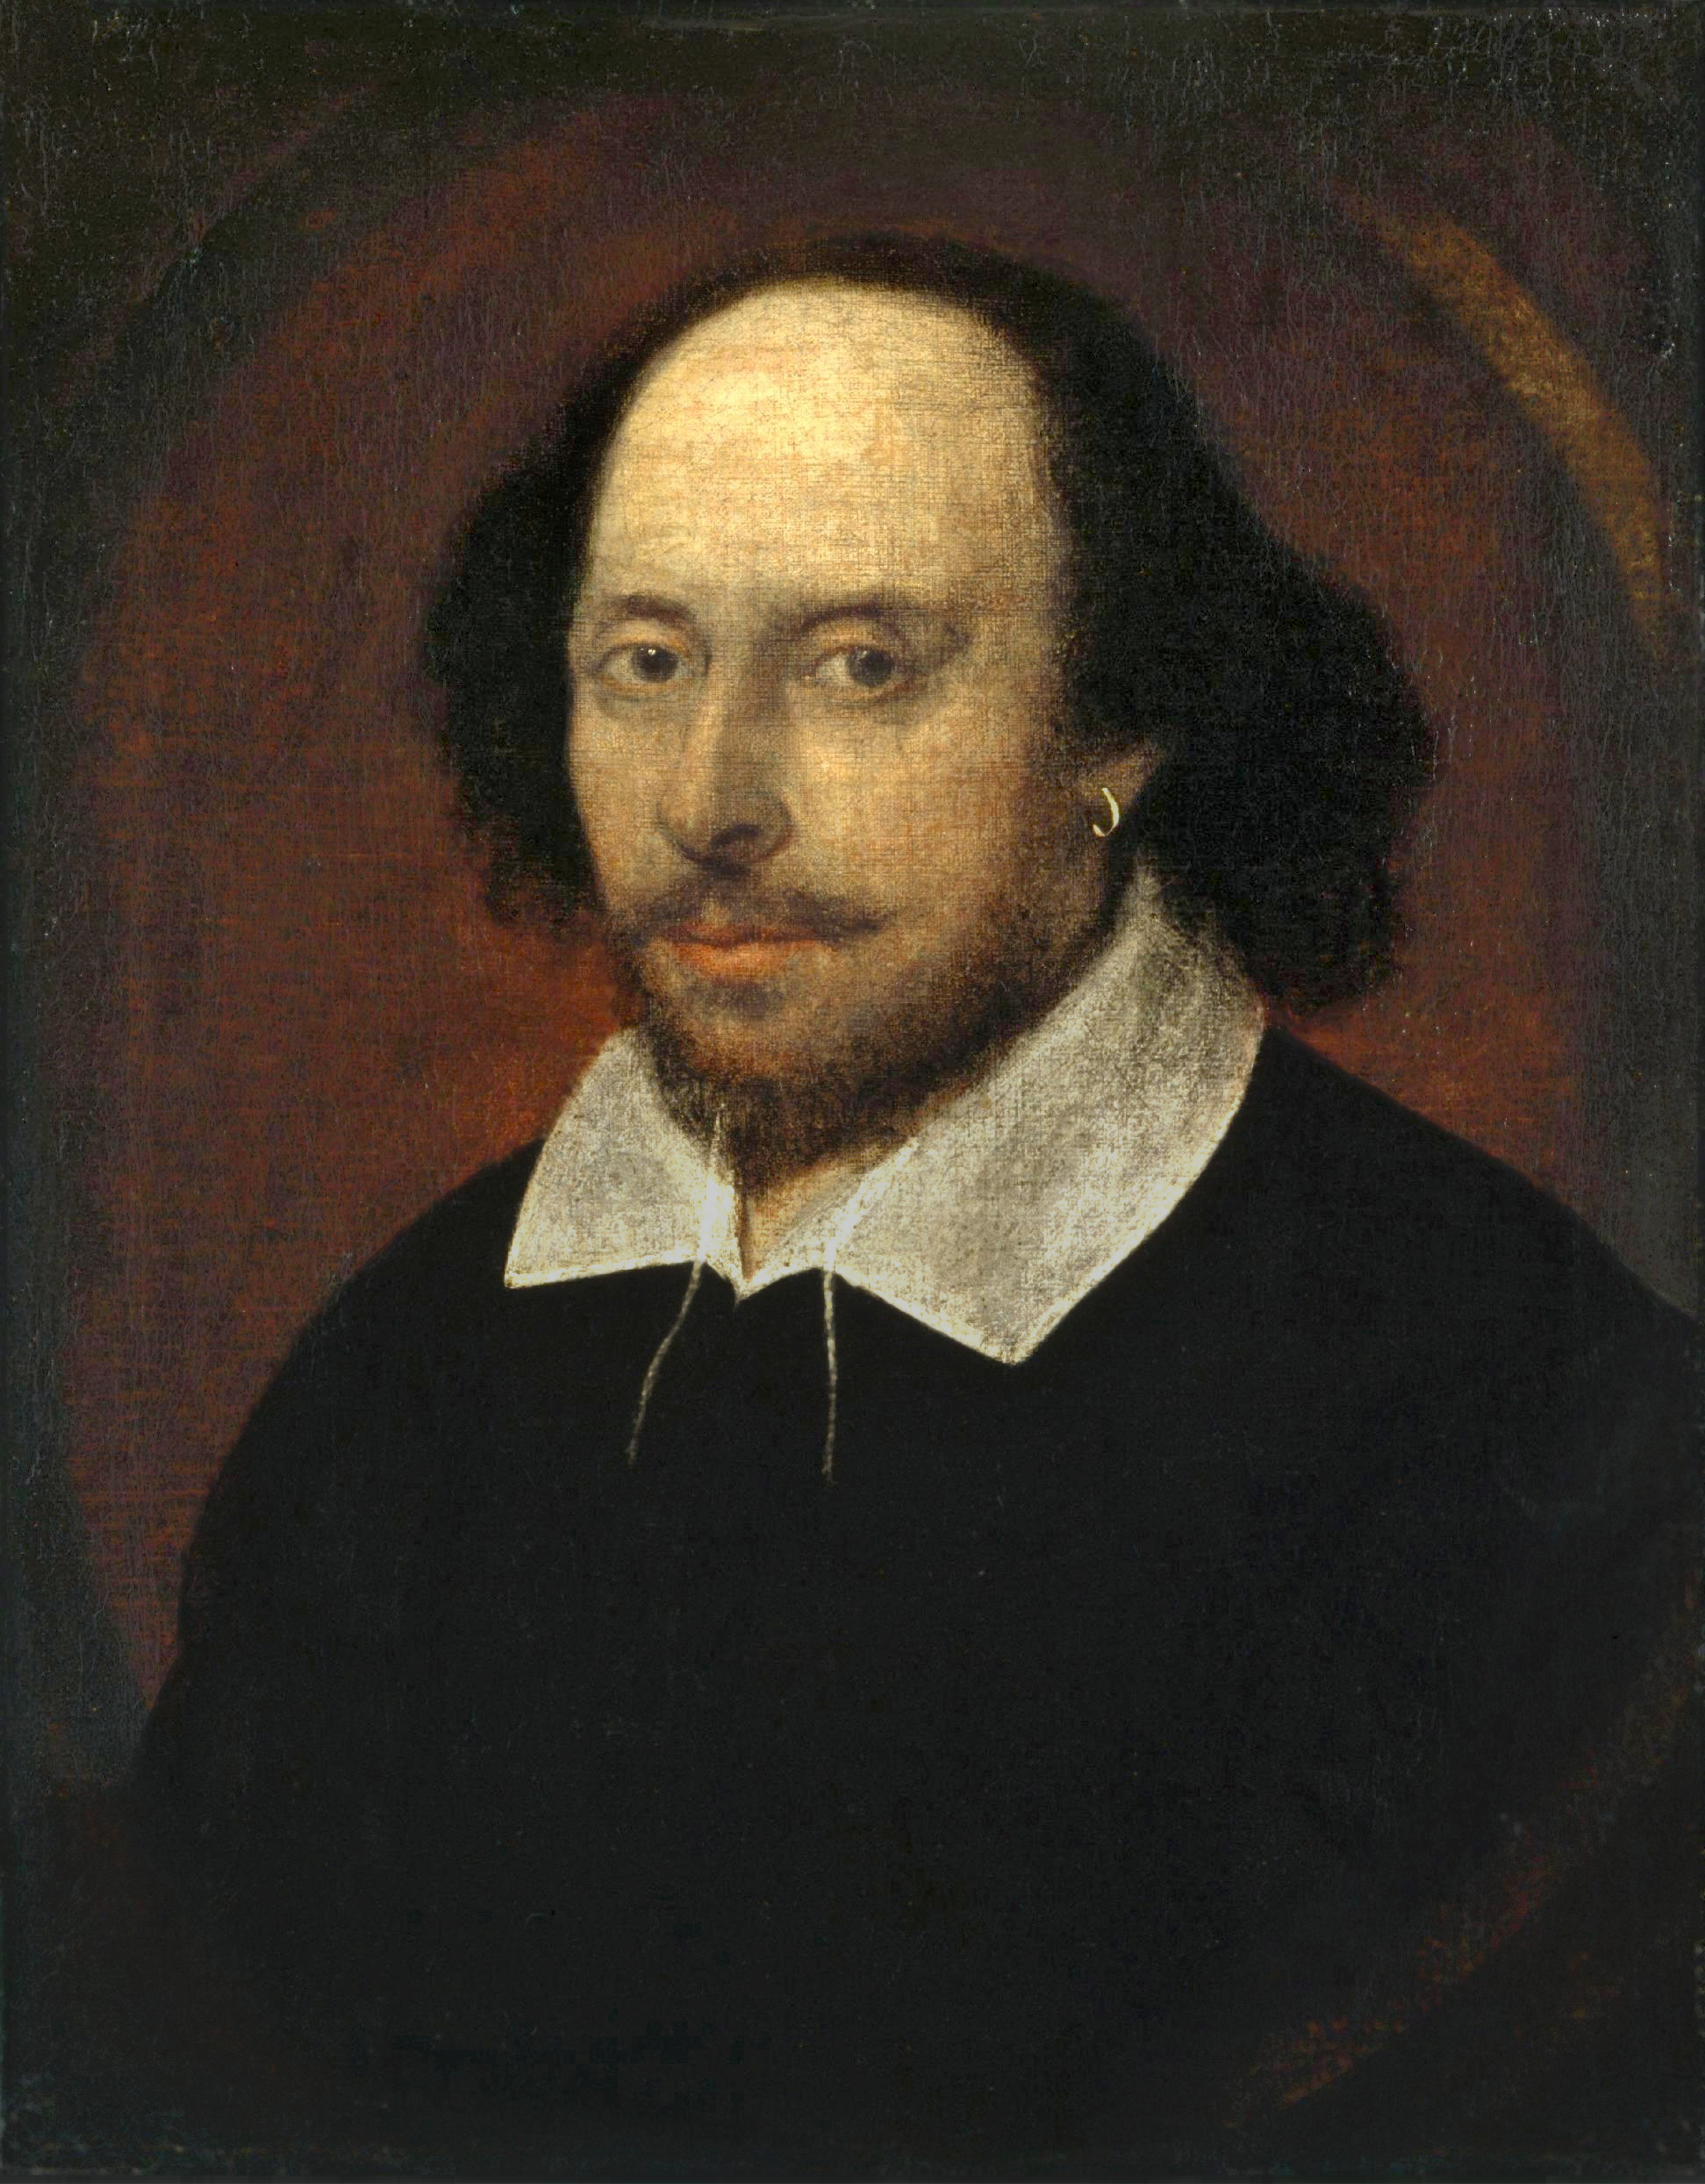 A painting of Shakespeare. He has a serious expression with his hair back and an earring.